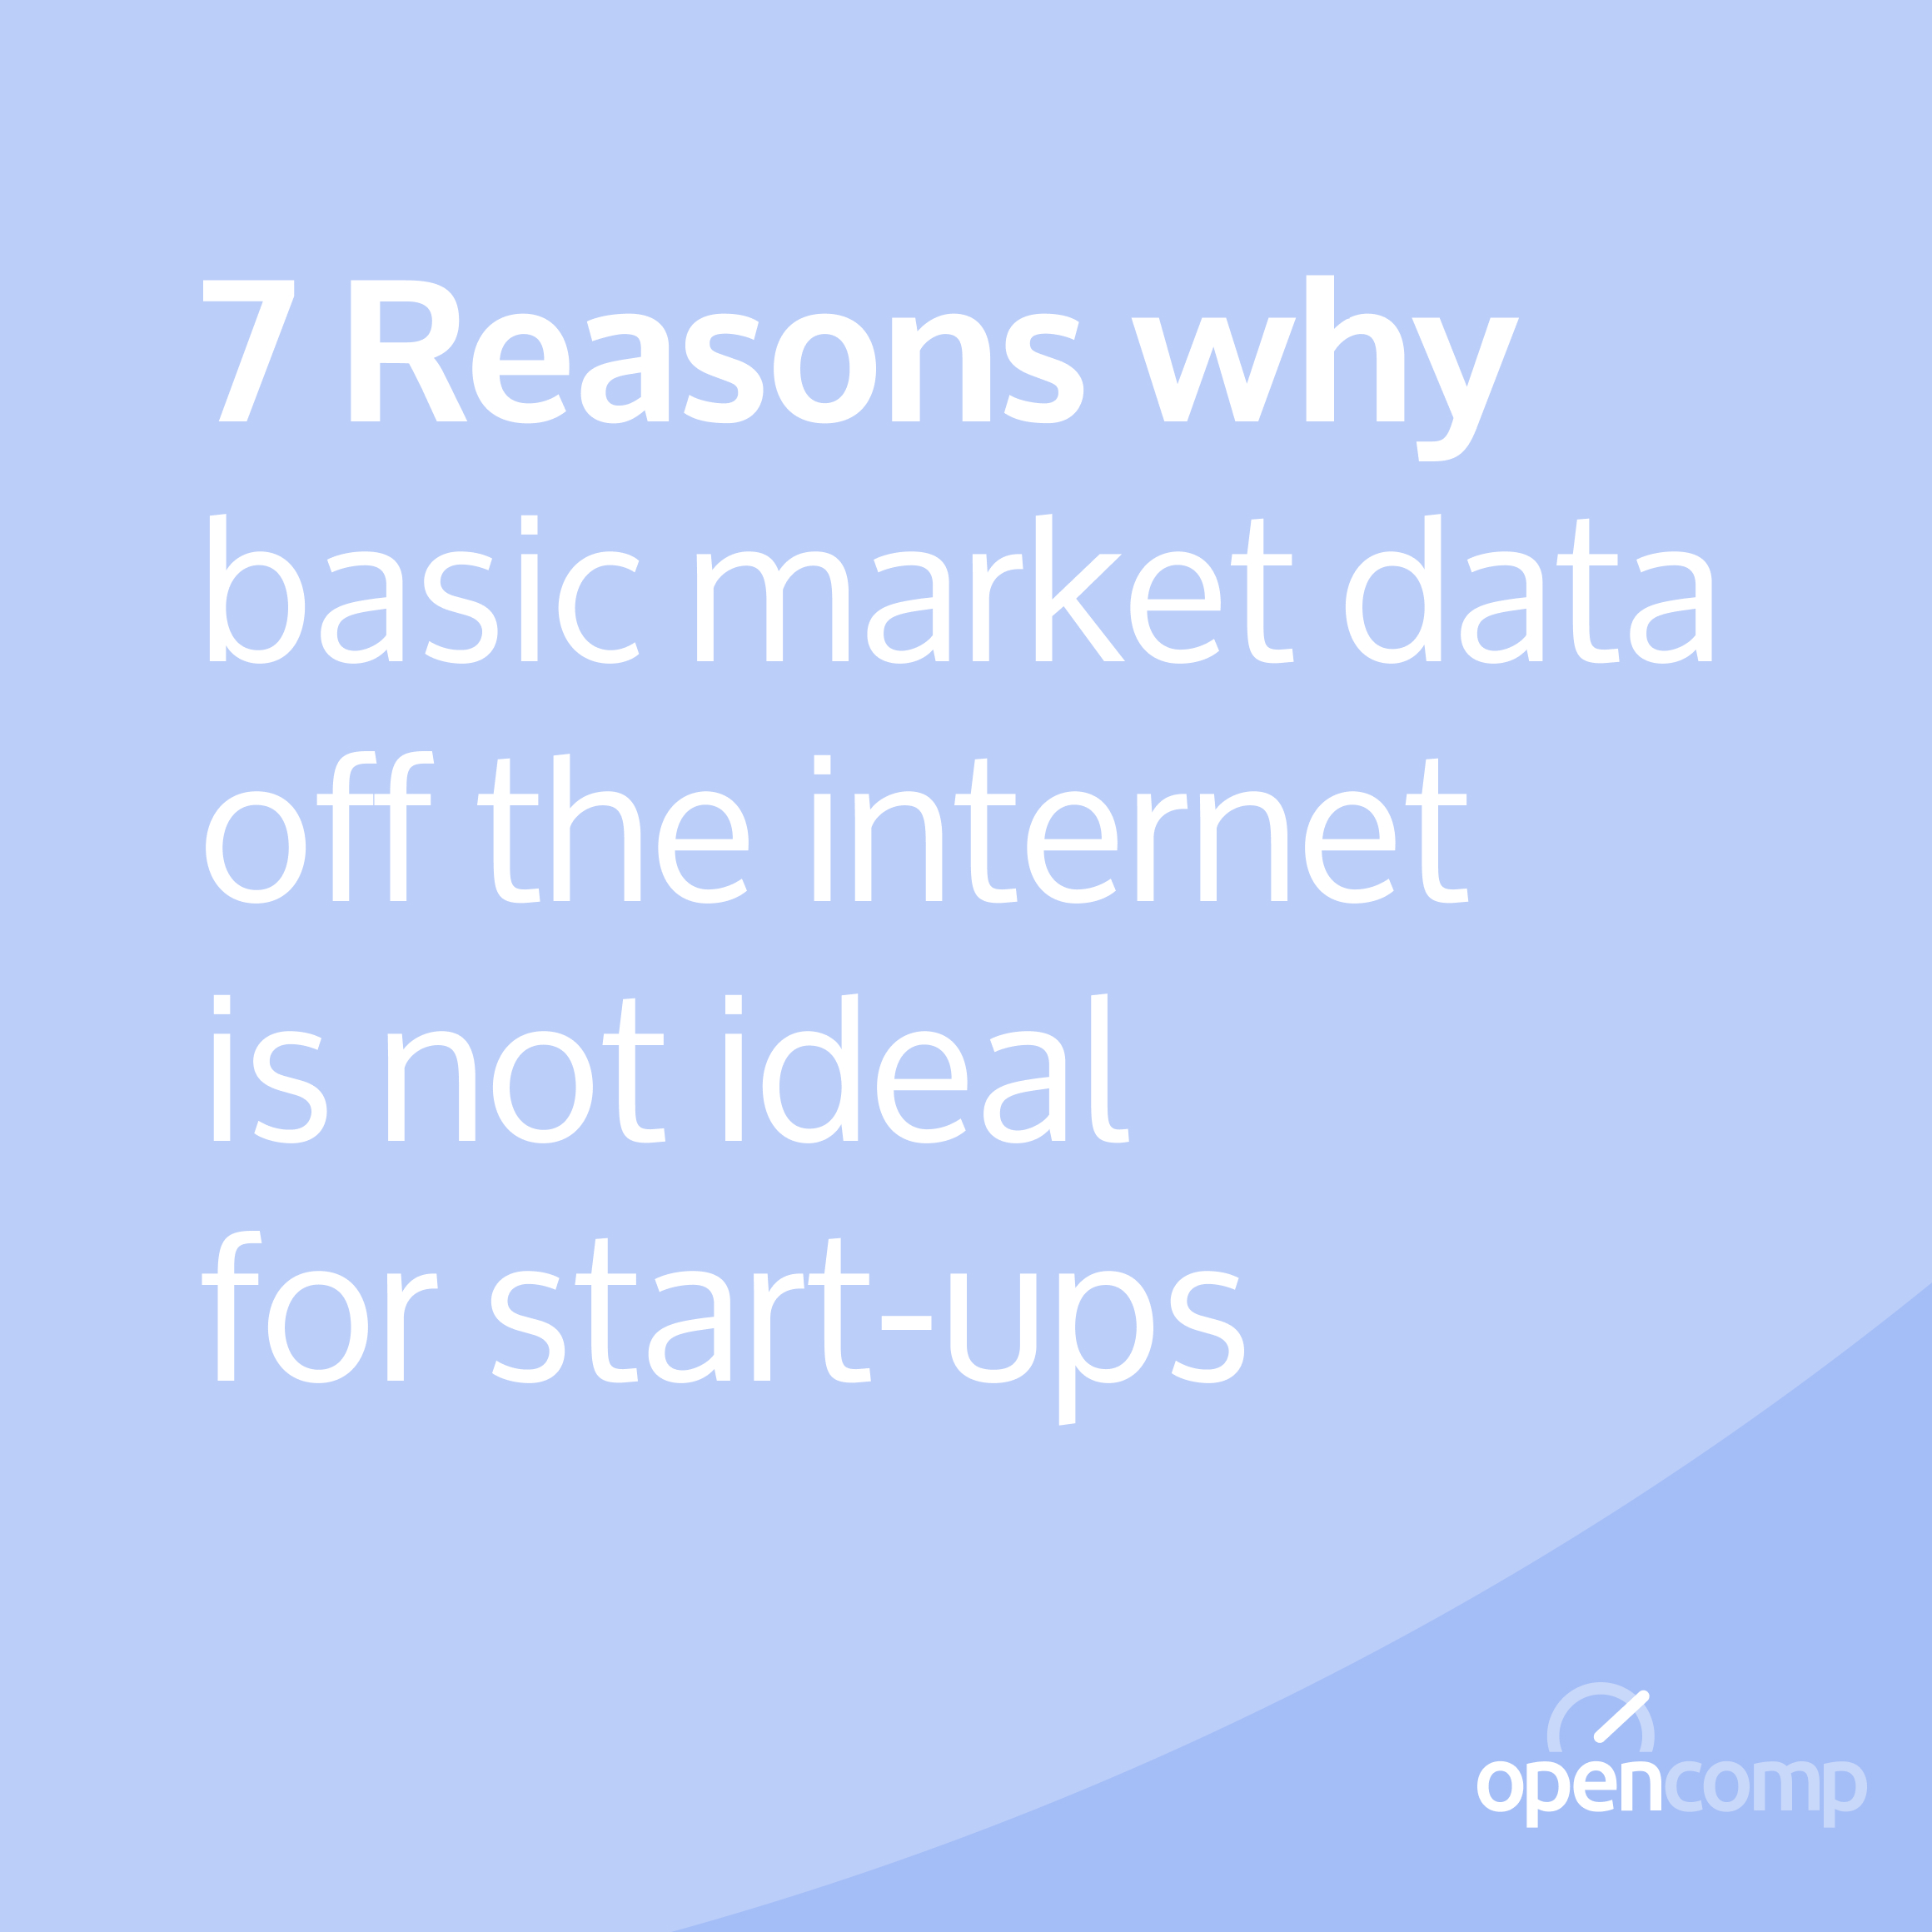 7 reasons why basic market data off the internet is not ideal for start-ups